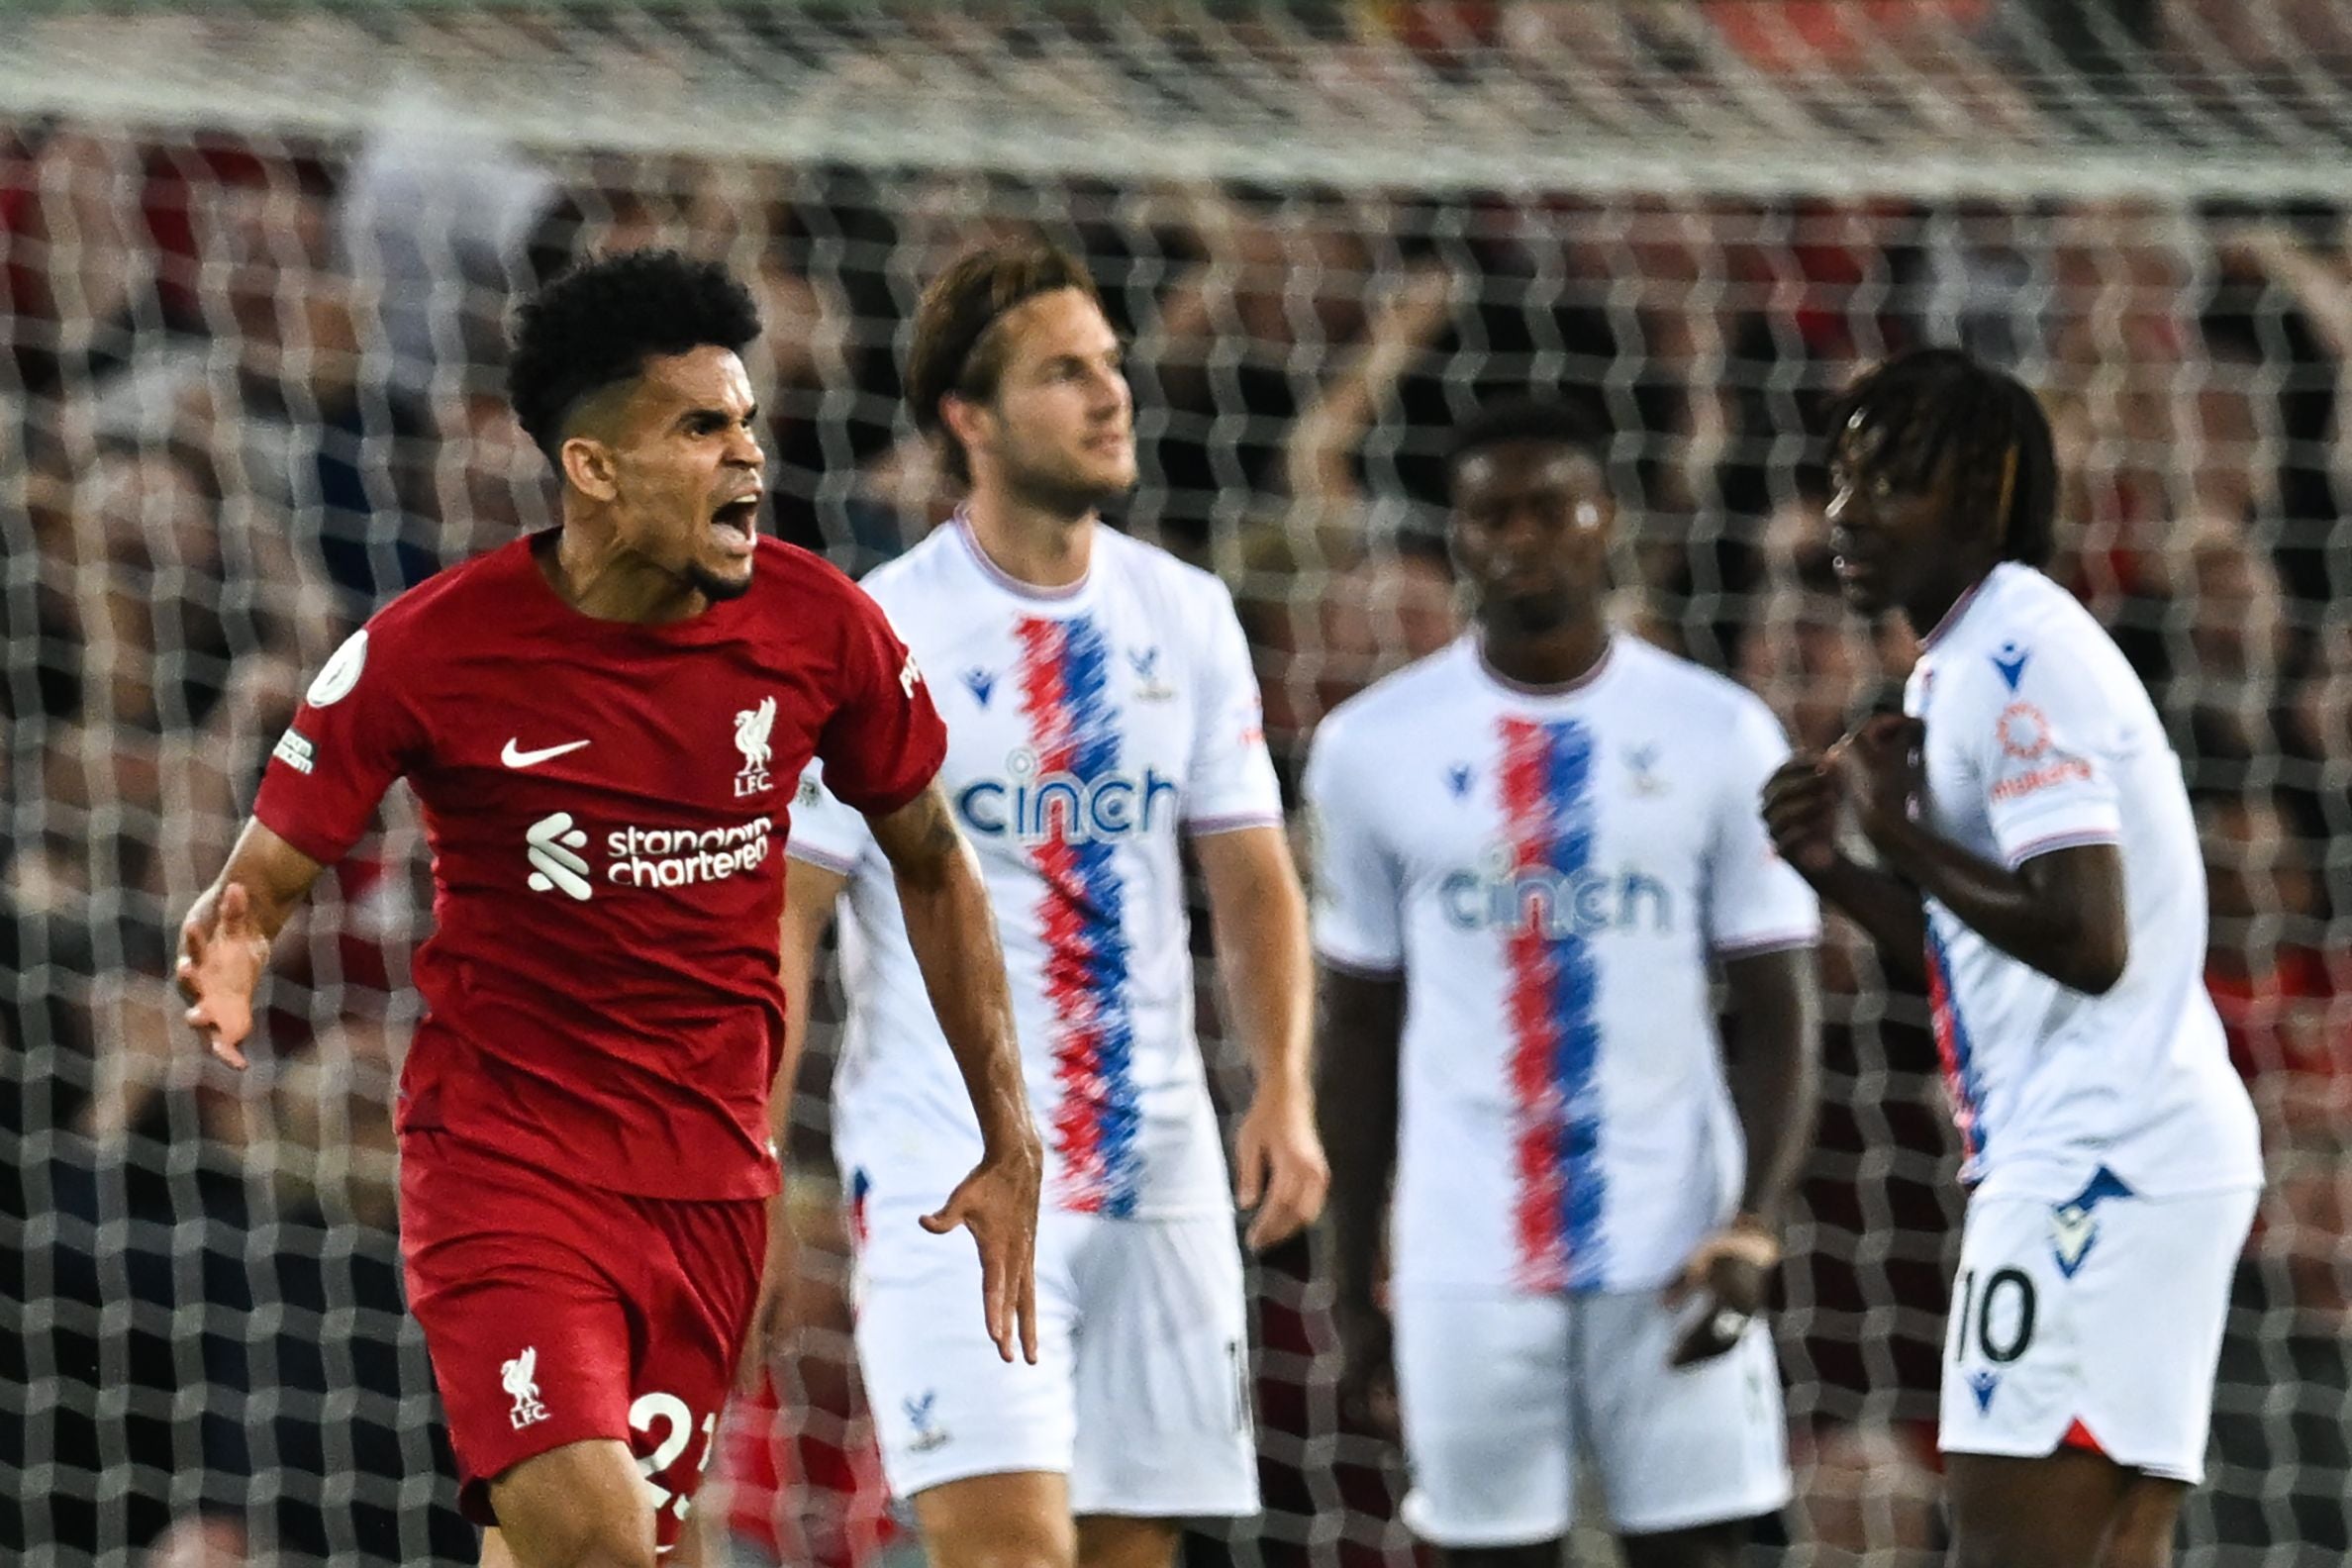 Liverpool Vs Crystal Palace Live Premier League Result Final Score And Reaction After Darwin Nunez Red Card The Independent